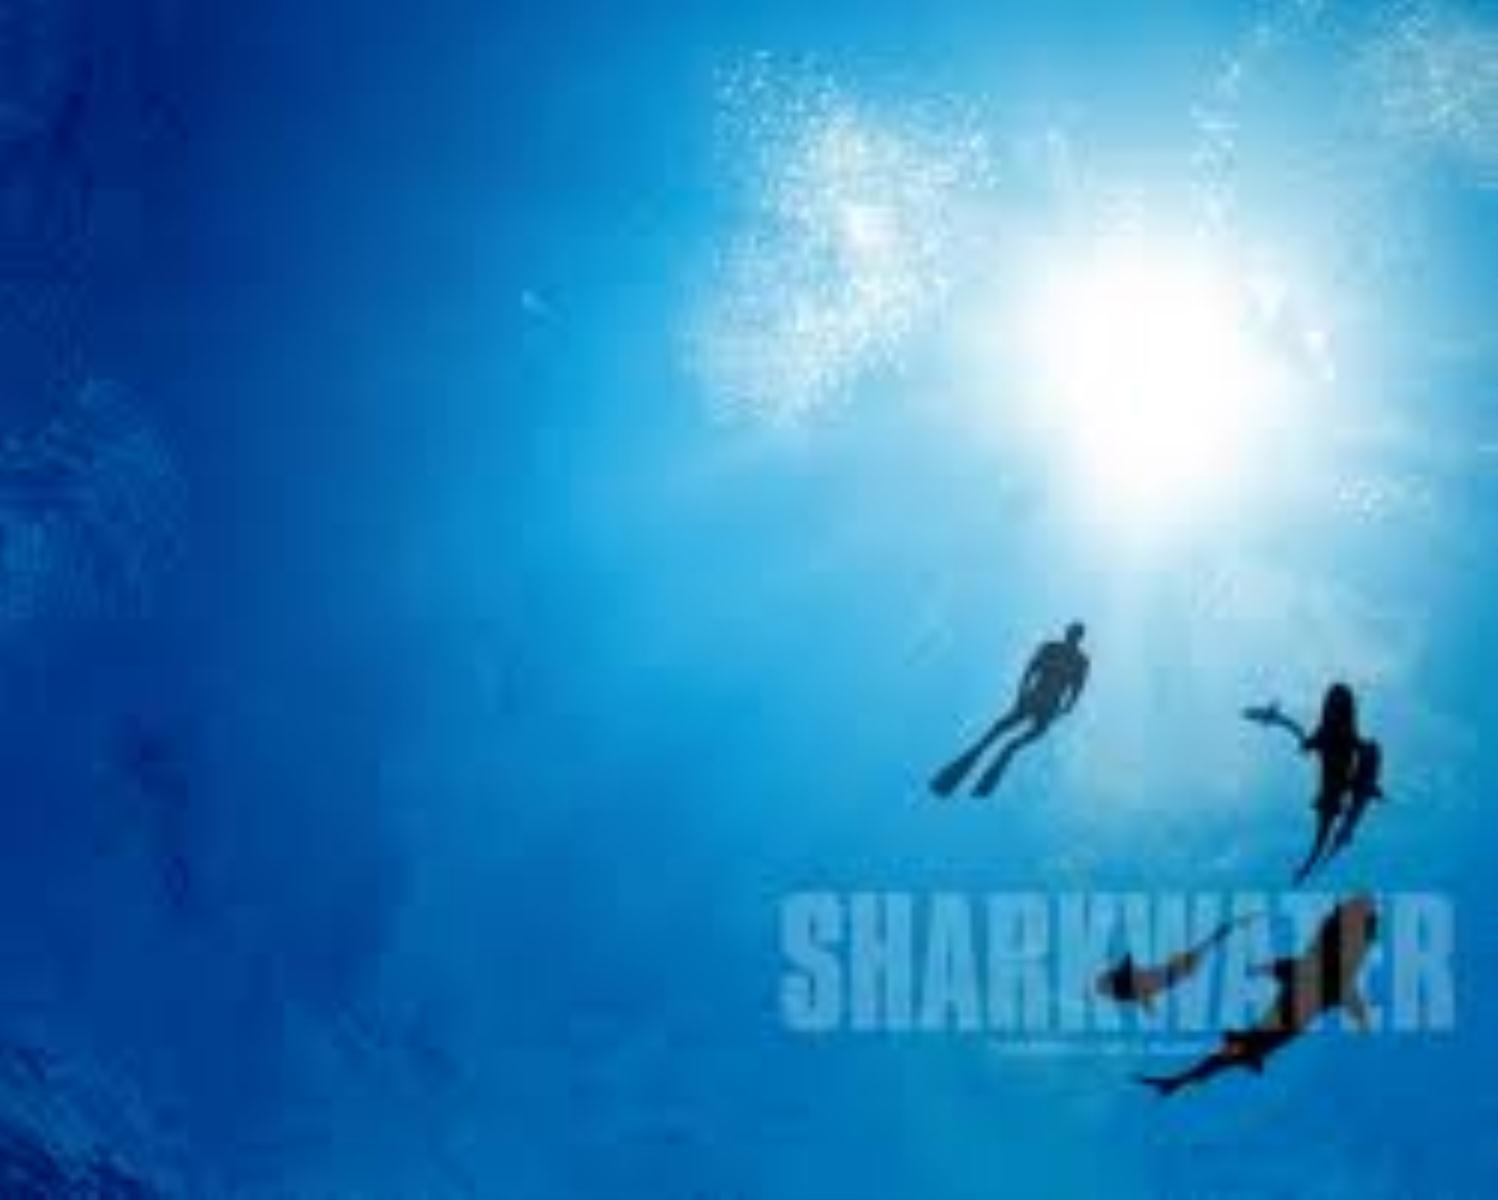 Sharkwater is a 2006 documentary film directed by Rob Stewart